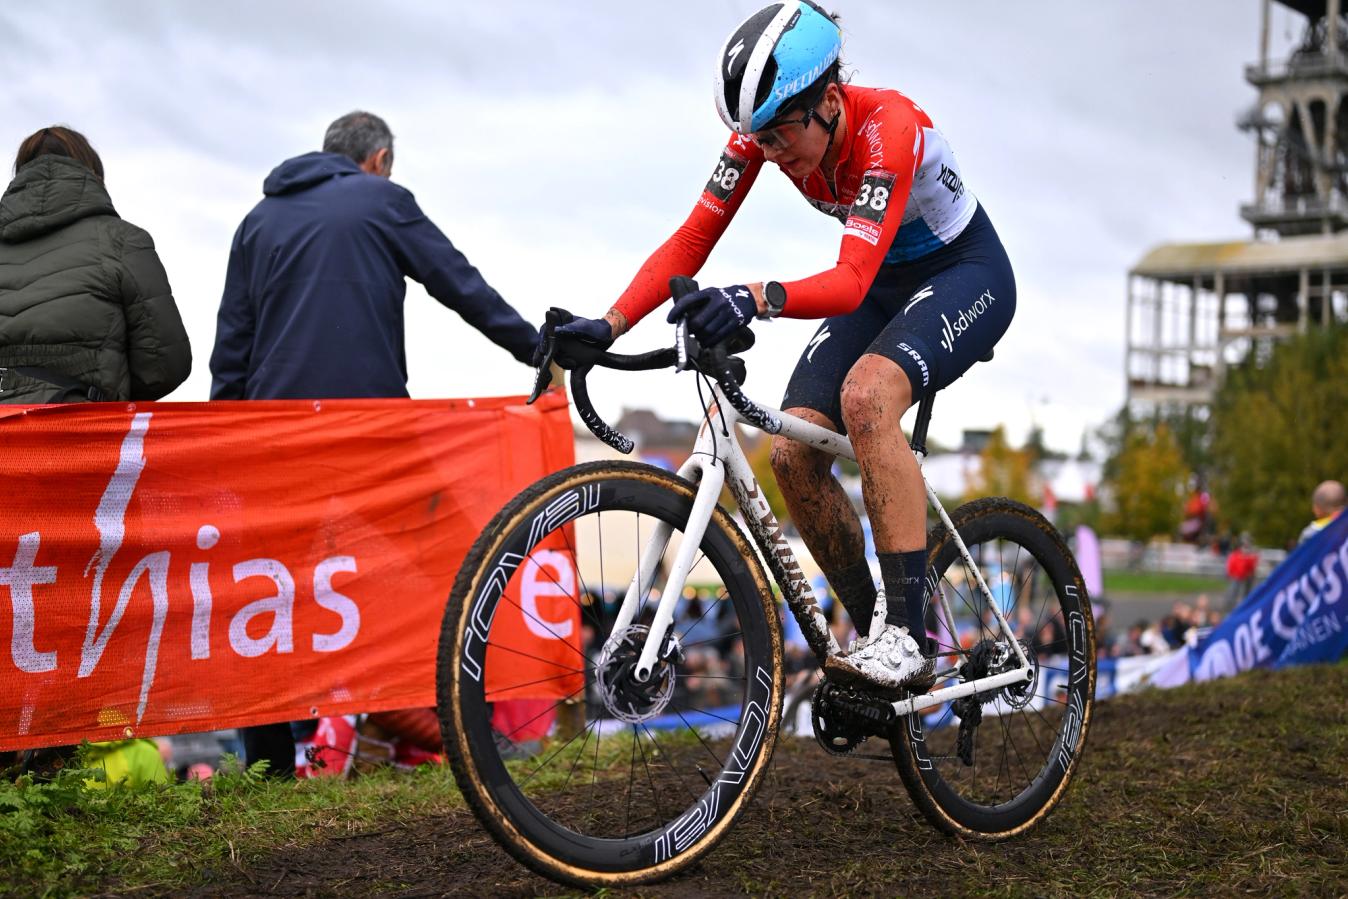 Cyclo-cross remains the main focus for Schreiber